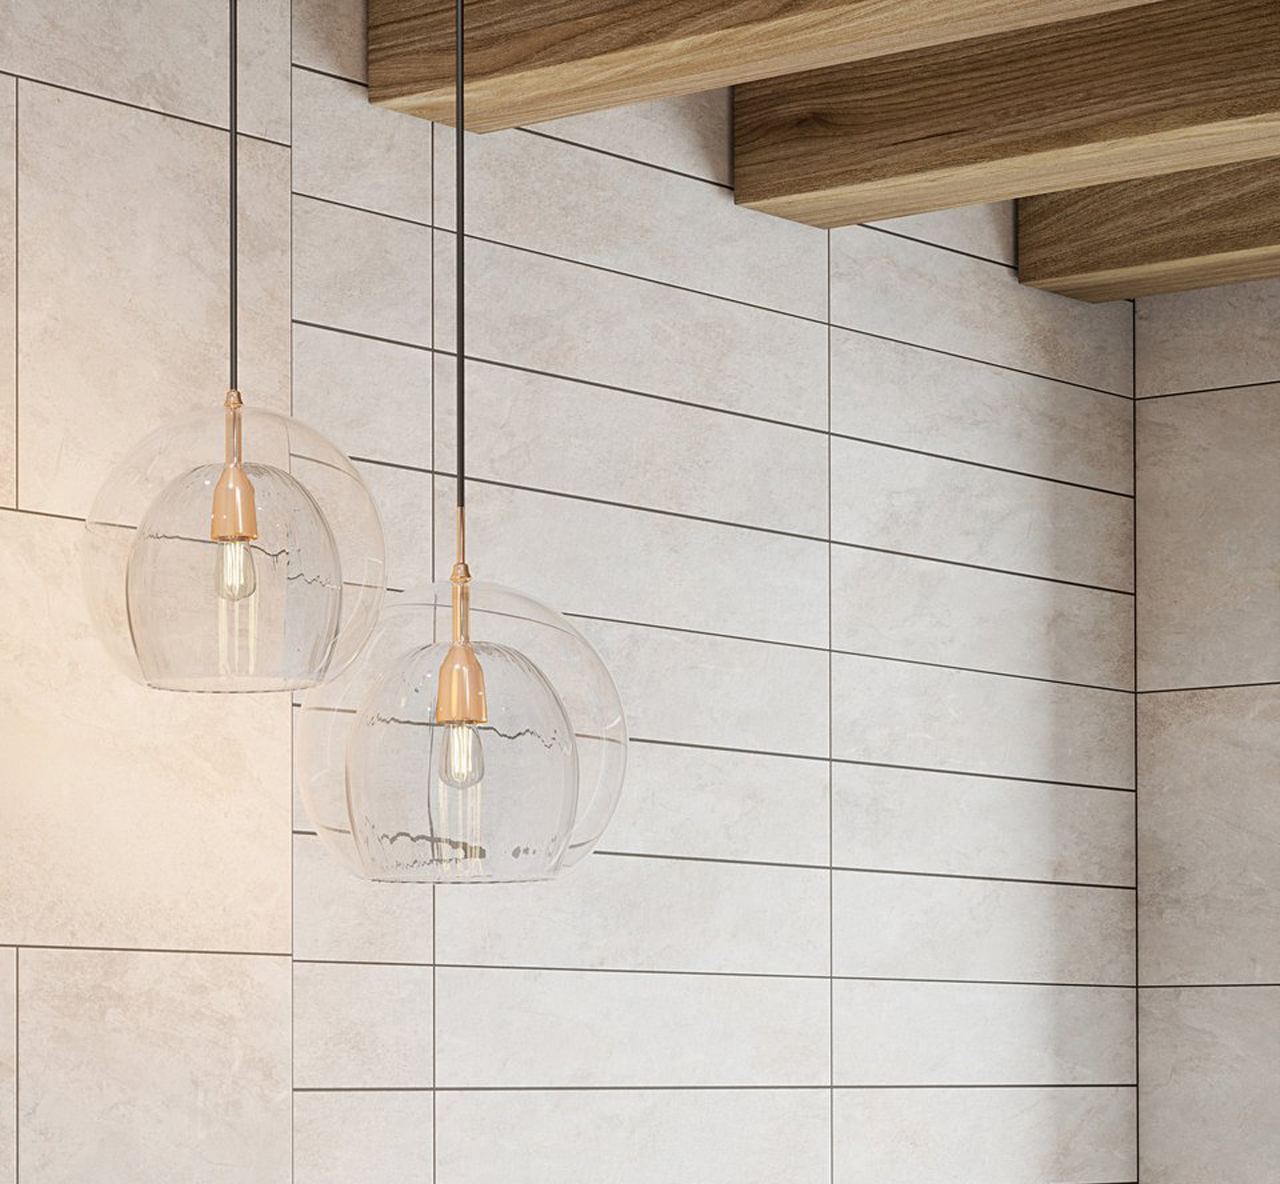 Johnsons Arlo Flint Once Scored Grey Wall Tiles used in a stone effect bathroom with hanging lights